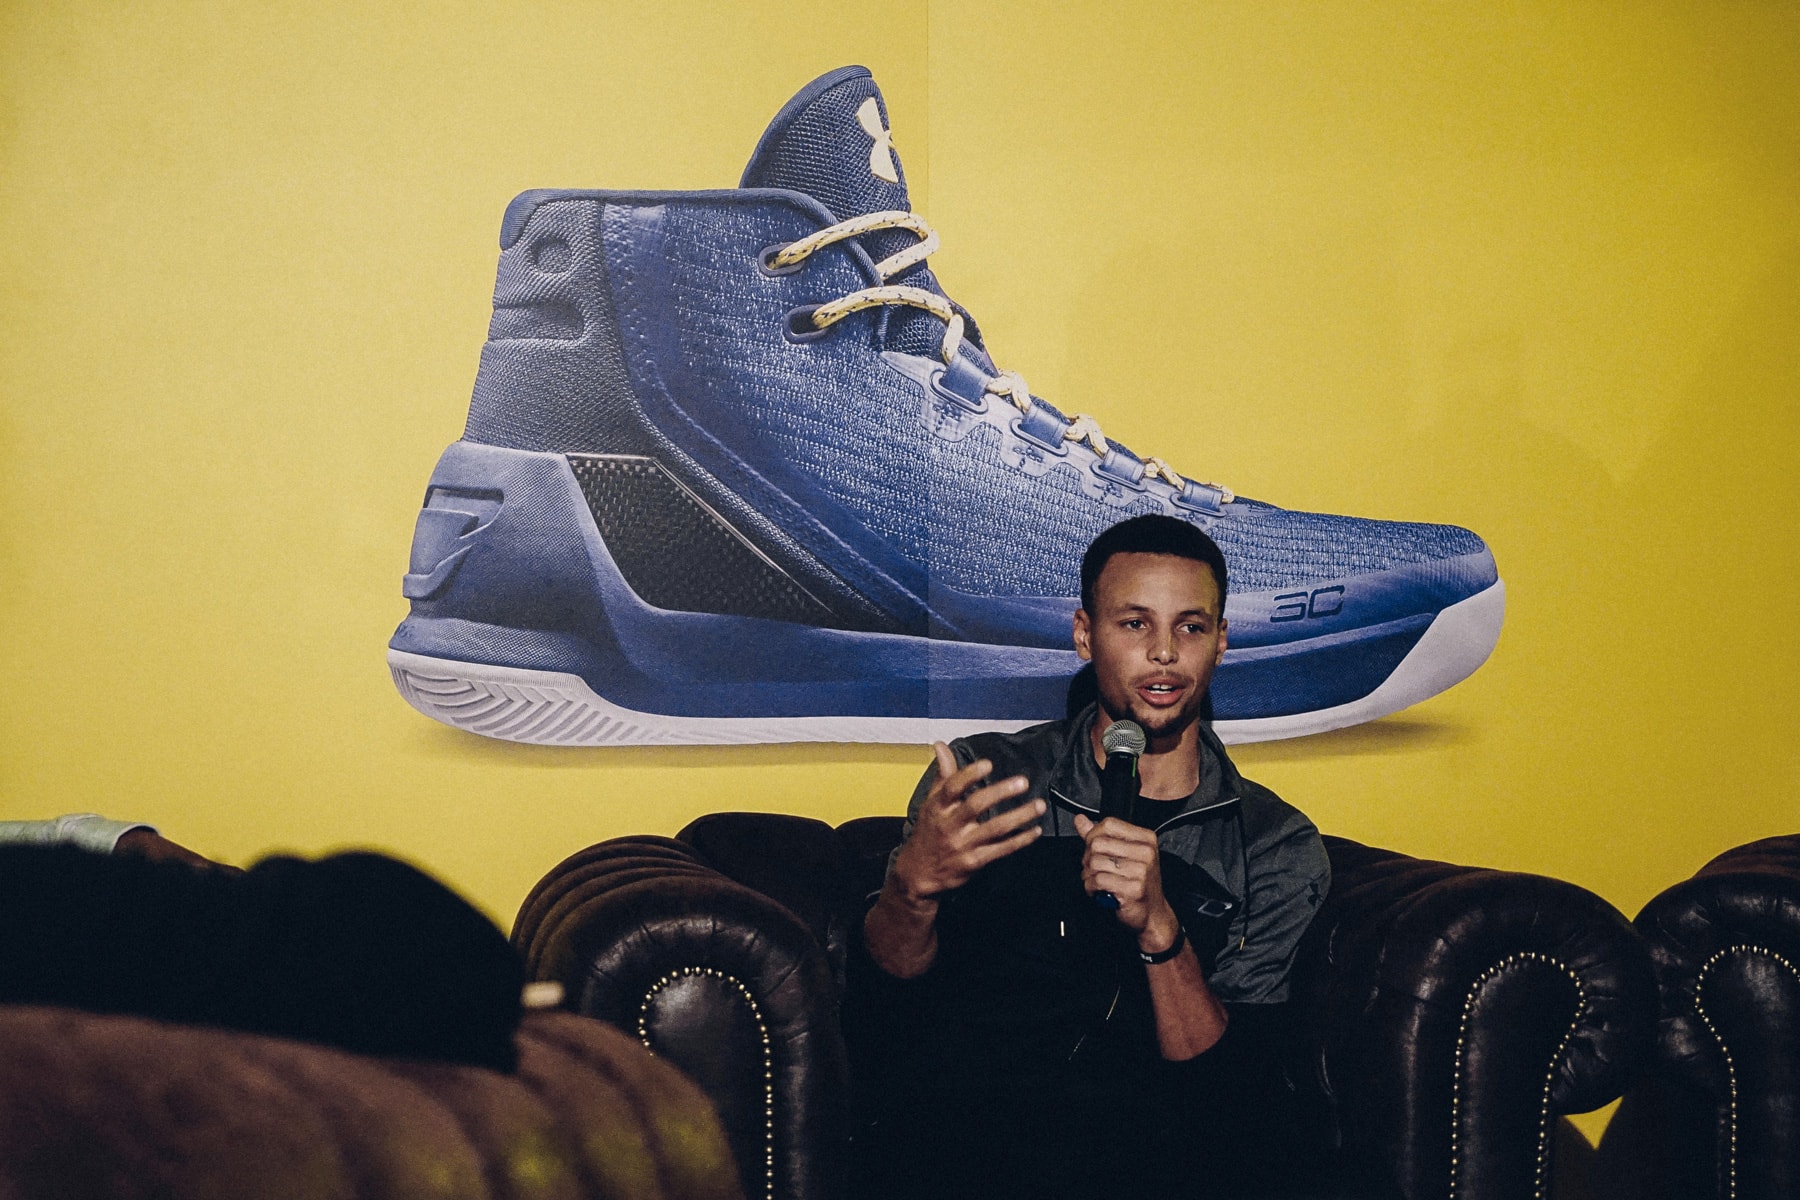 Under Armour's Curry Two: Why does Stephen Curry wear such corny sneakers?